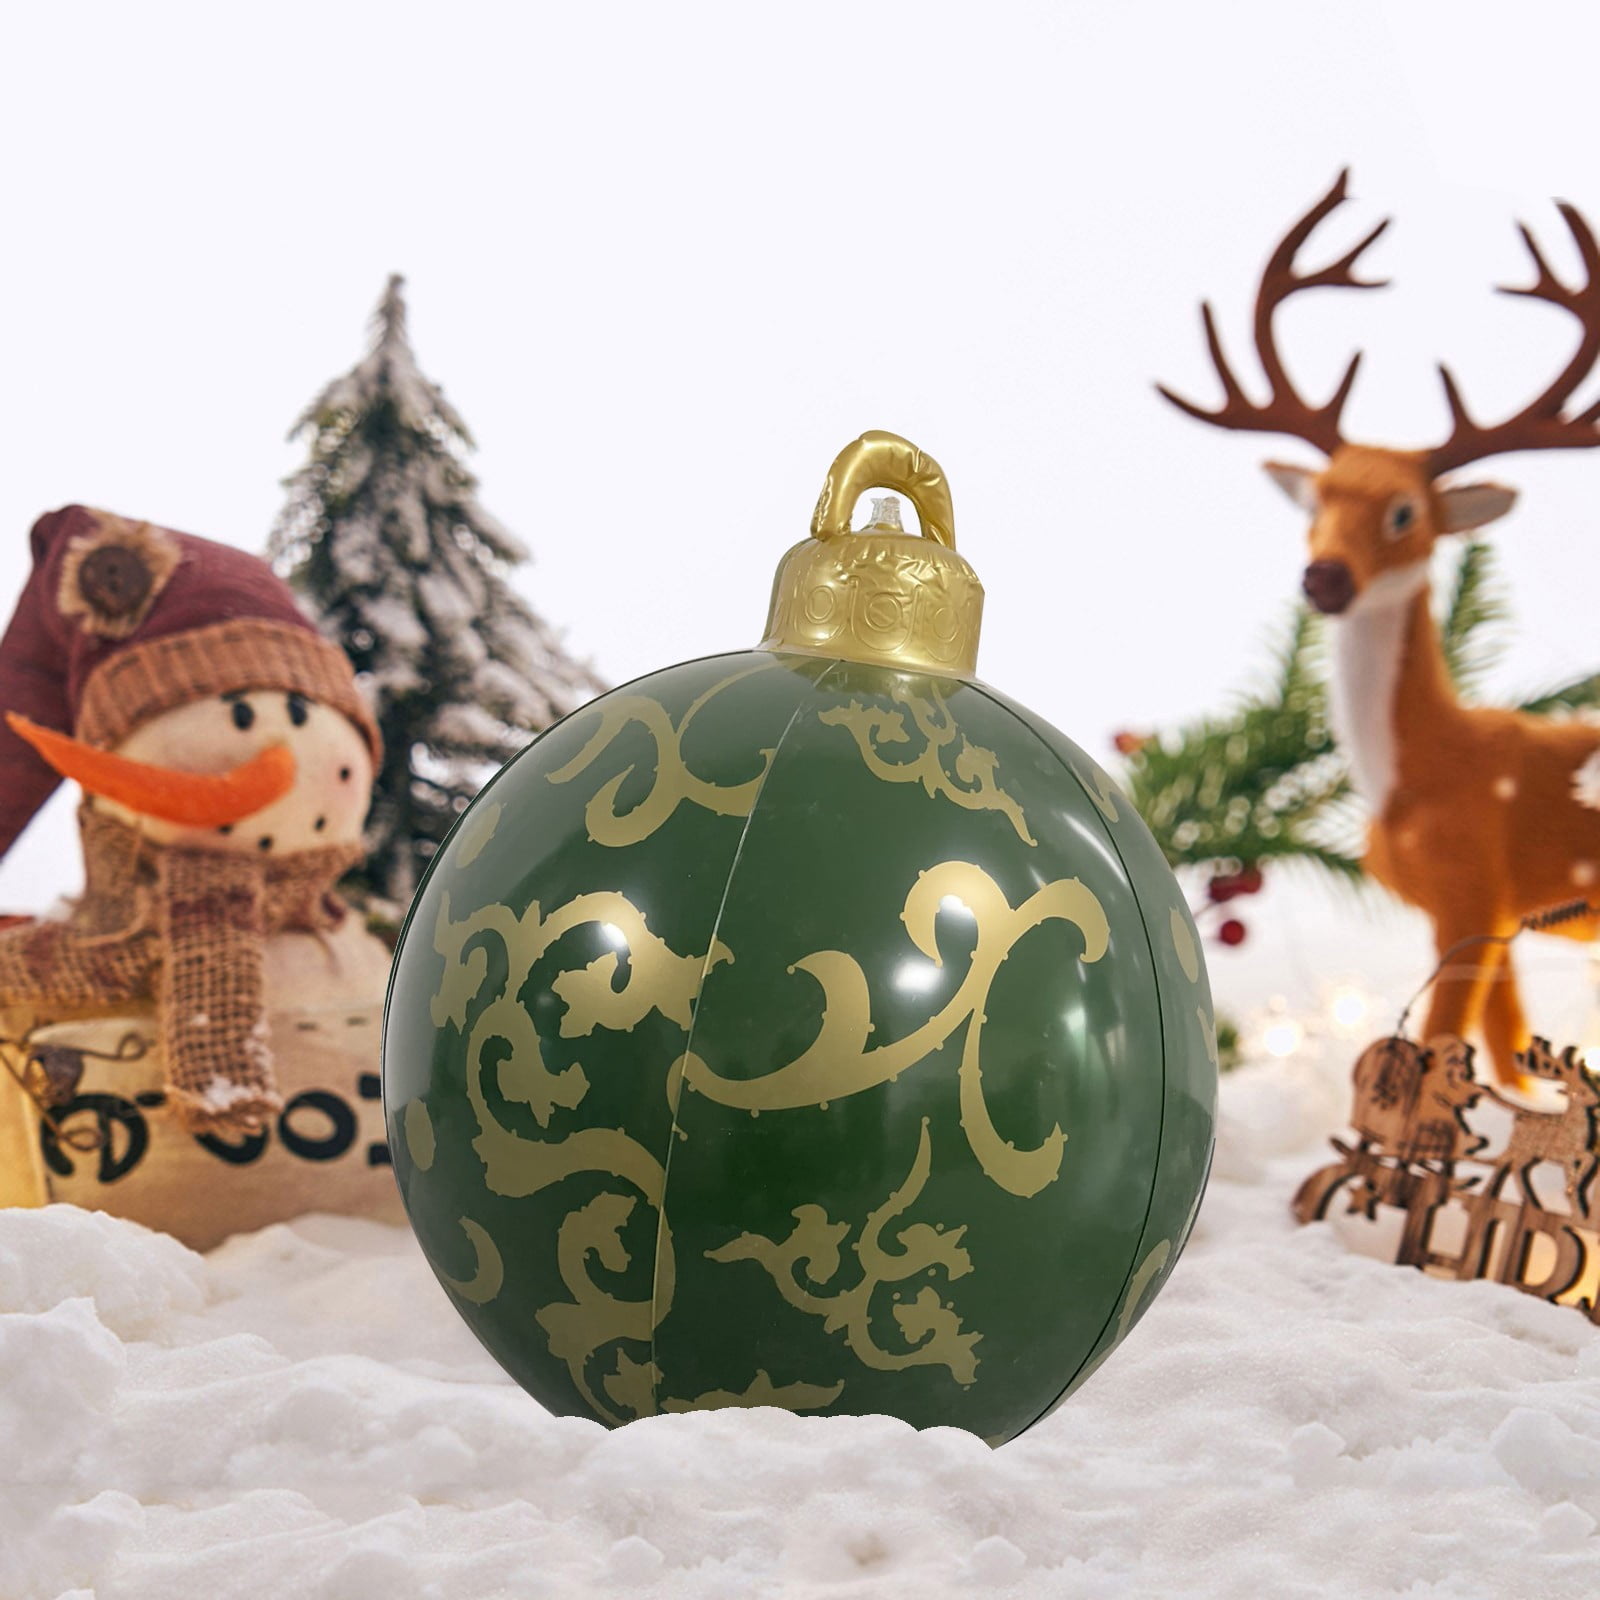 Jovati Christmas Ball Ornaments Outdoor PVC Inflatable Decorated